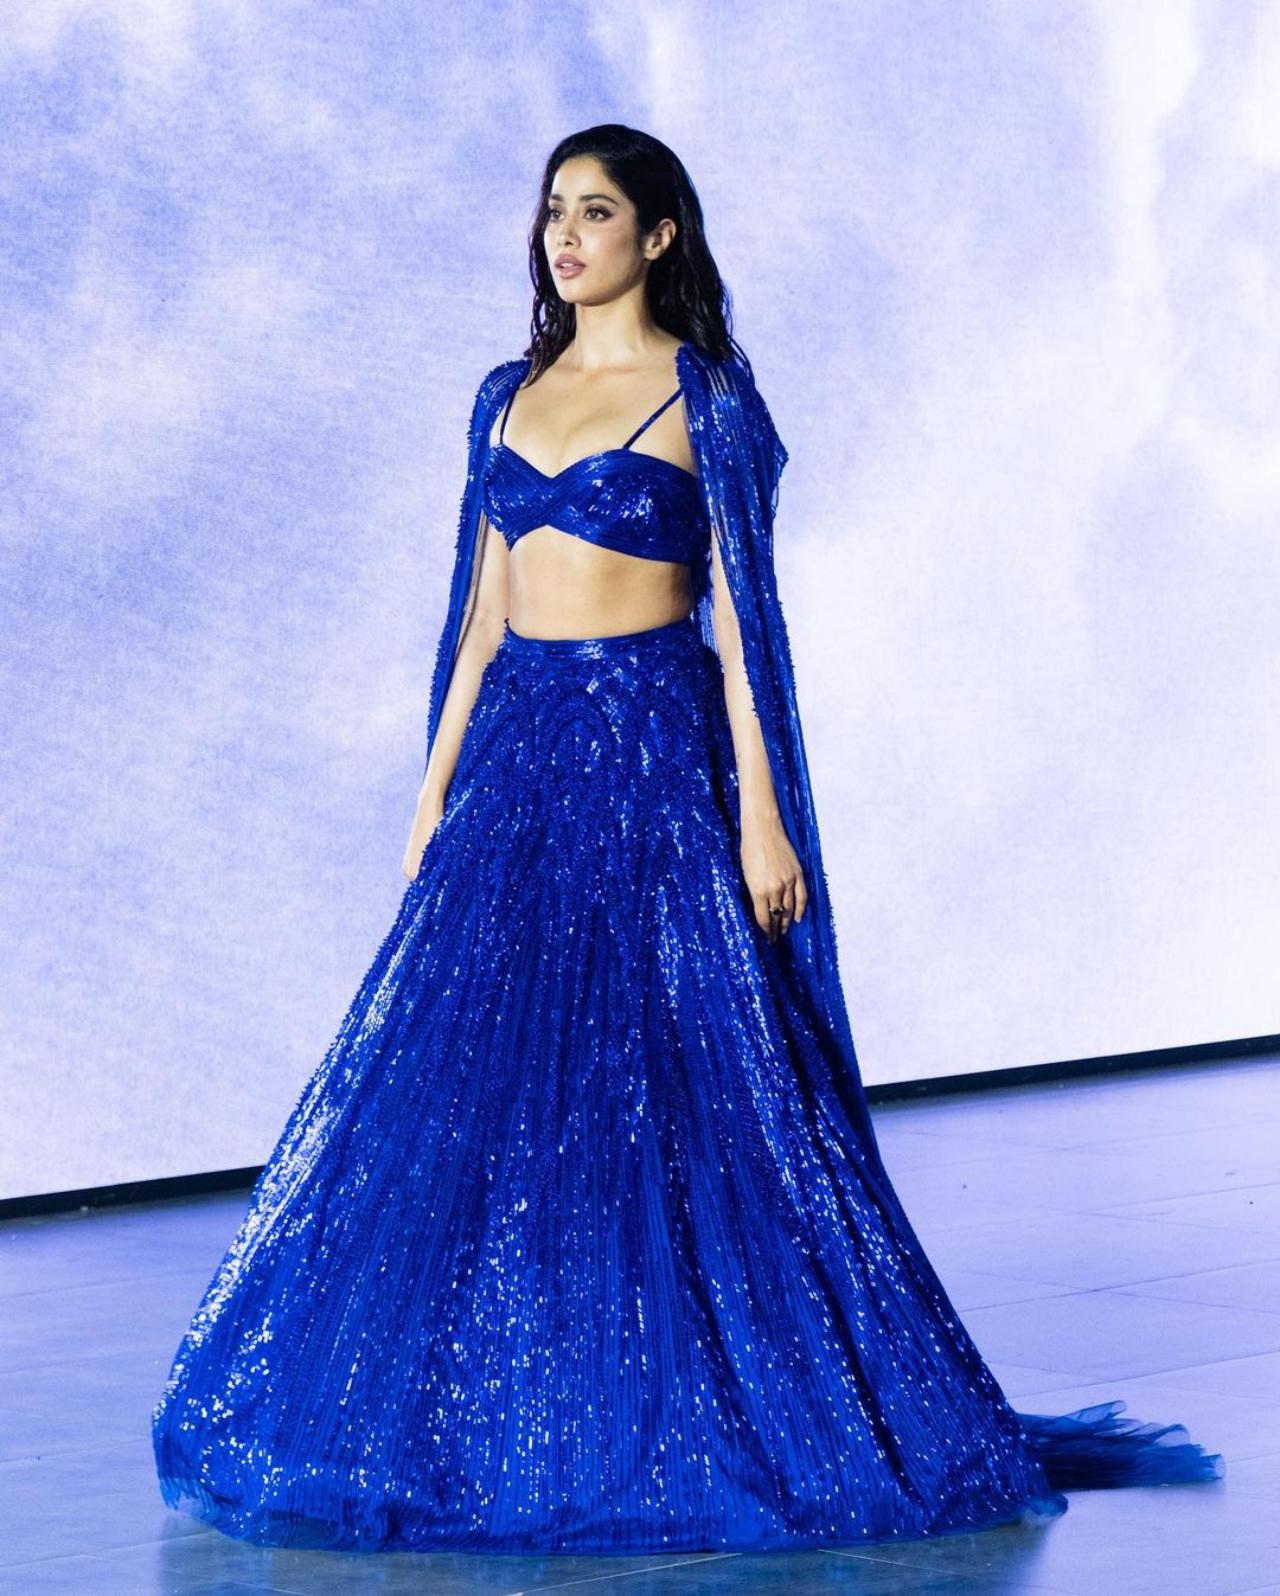 Jahnvi Kapoor stole the stage for Gupta's 'Hiranyagarbha' collection. She walked the ramp in a stunning midnight blue lehenga, whose electrifying colour, intricate embroidery and star-like glitter swept audiences away. Her outfit featured a bralette-style blue blouse with thin stripes and a plunging neckline. She paired it with a free-flowing long blue skirt and a cape, whose trail seemed to make her levitate. Truly magical!